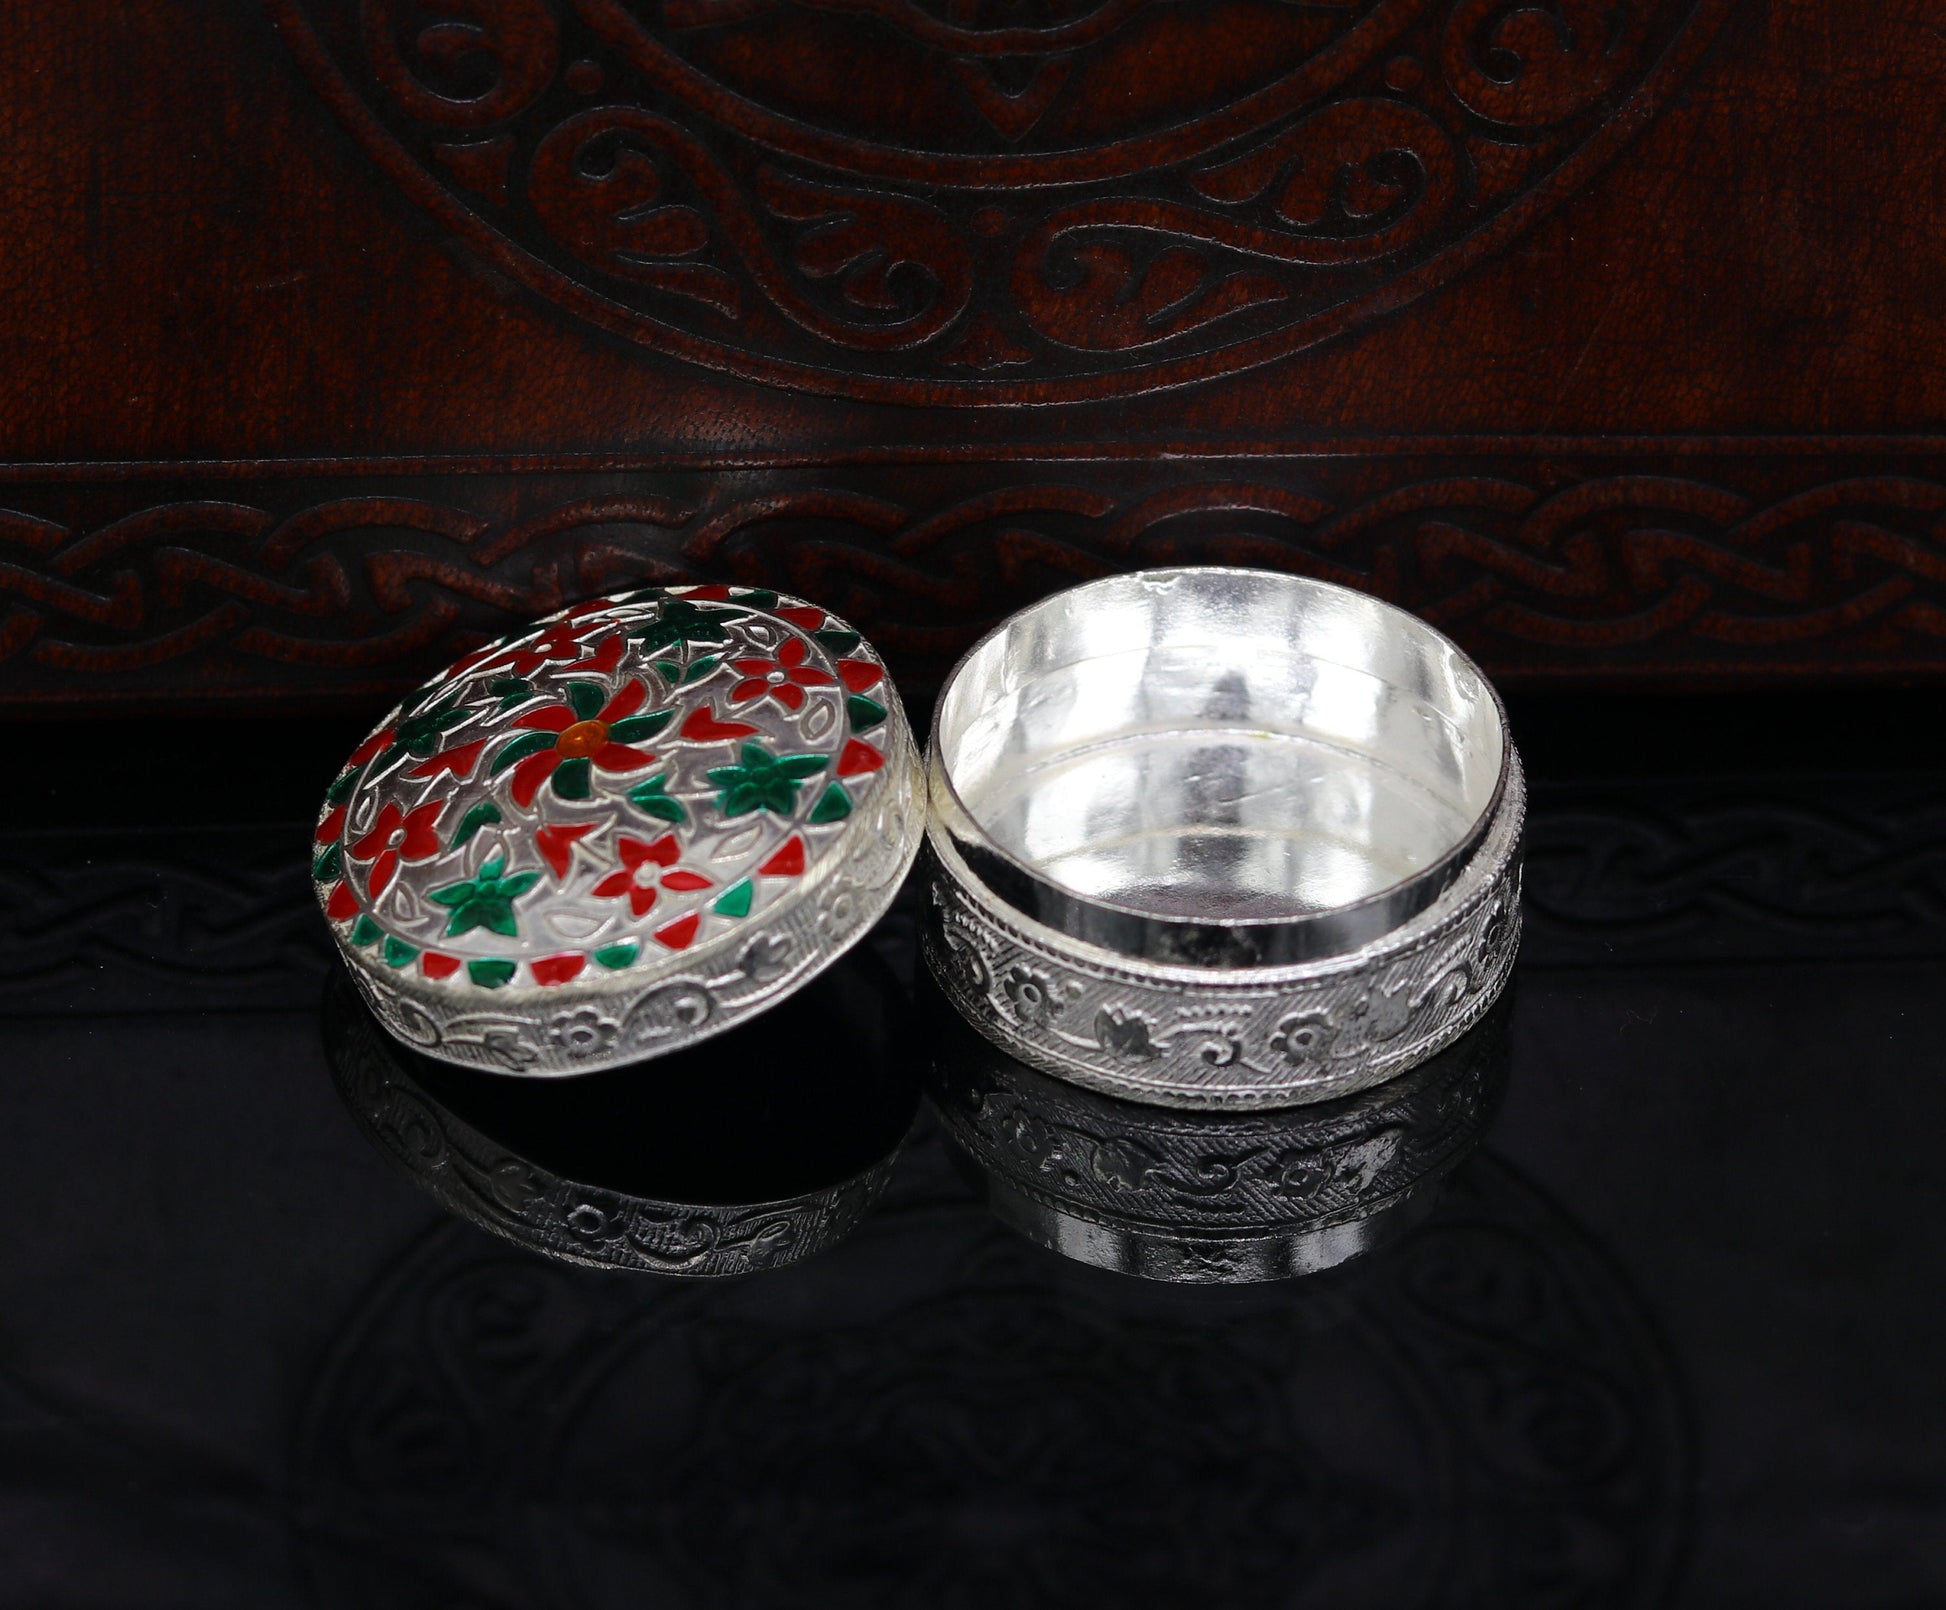 925 sterling silver trinket box, kumkum box/ casket box bridal gifts enamel jewelry box collection, container box, jewelry box art stb49 - TRIBAL ORNAMENTS